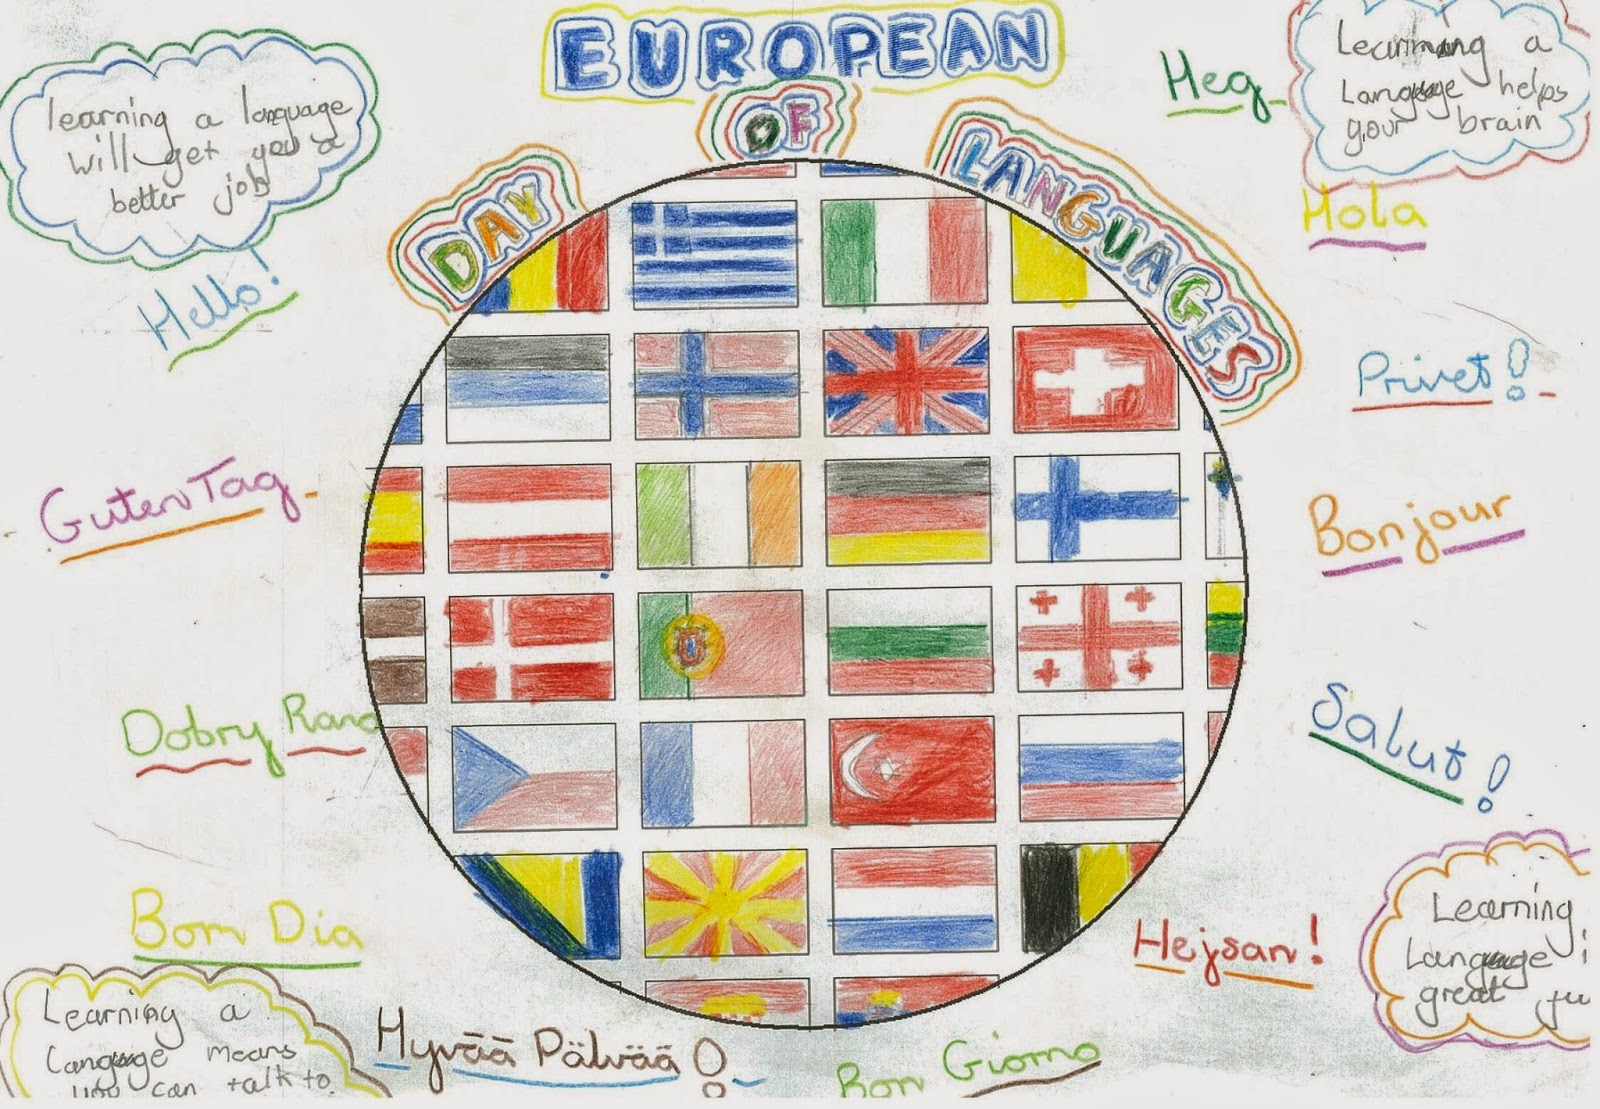 European Day of Languages 2014: October 2014